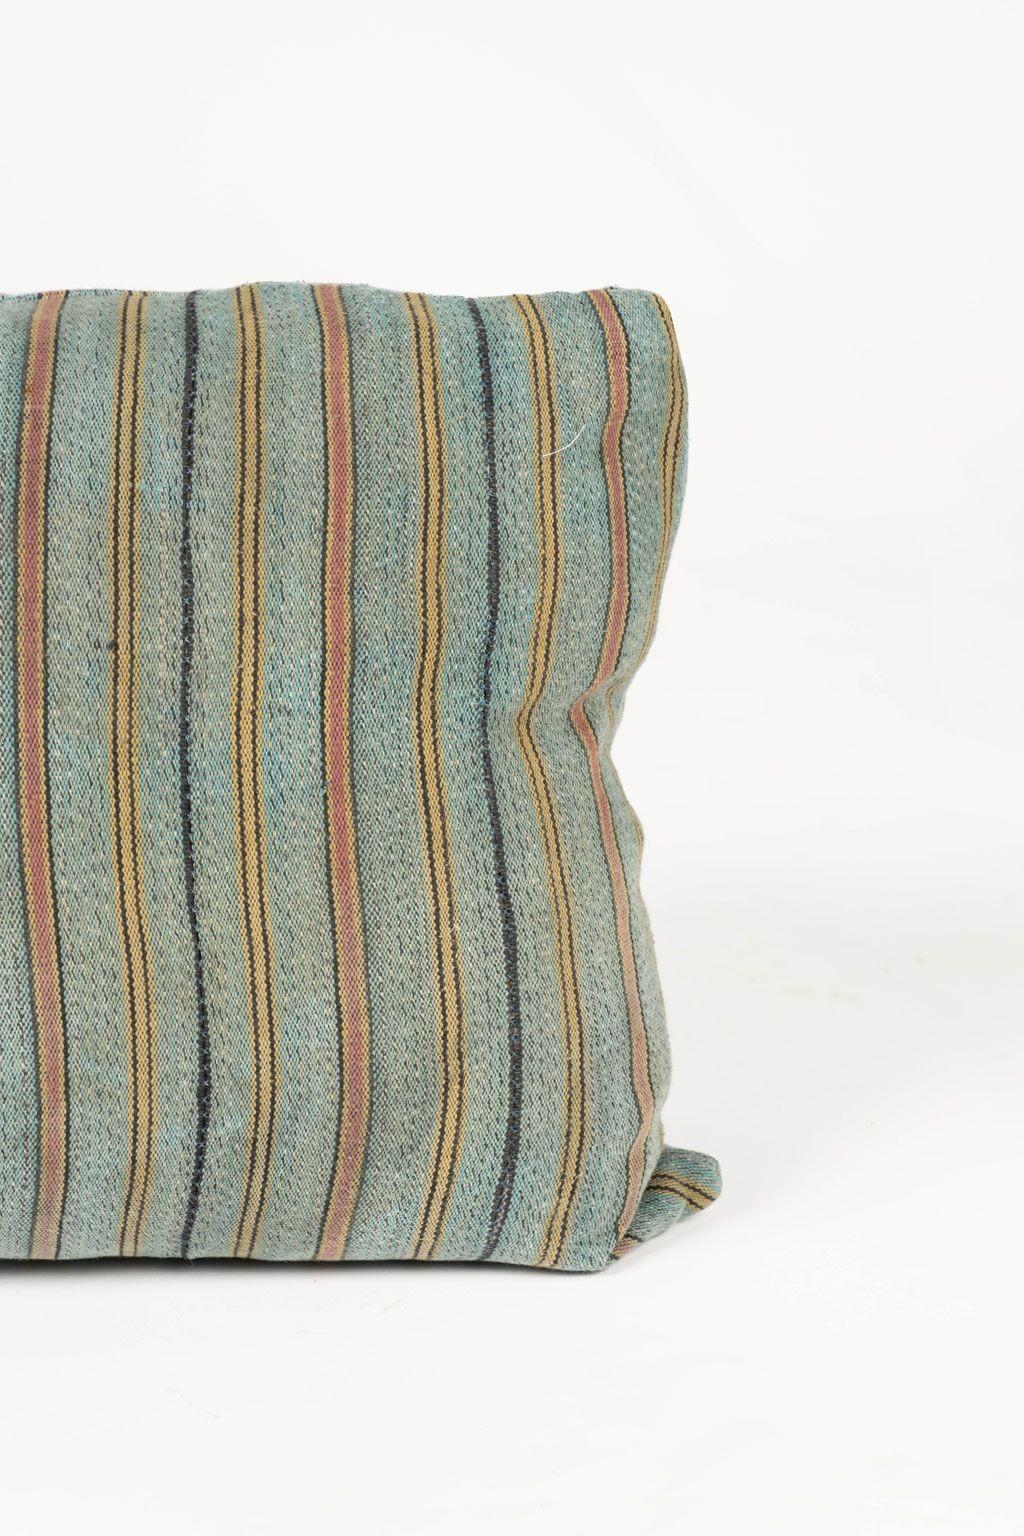 Folk Art Large Teal, Gold, Navy and Coral Striped Print Lumbar Cushion For Sale